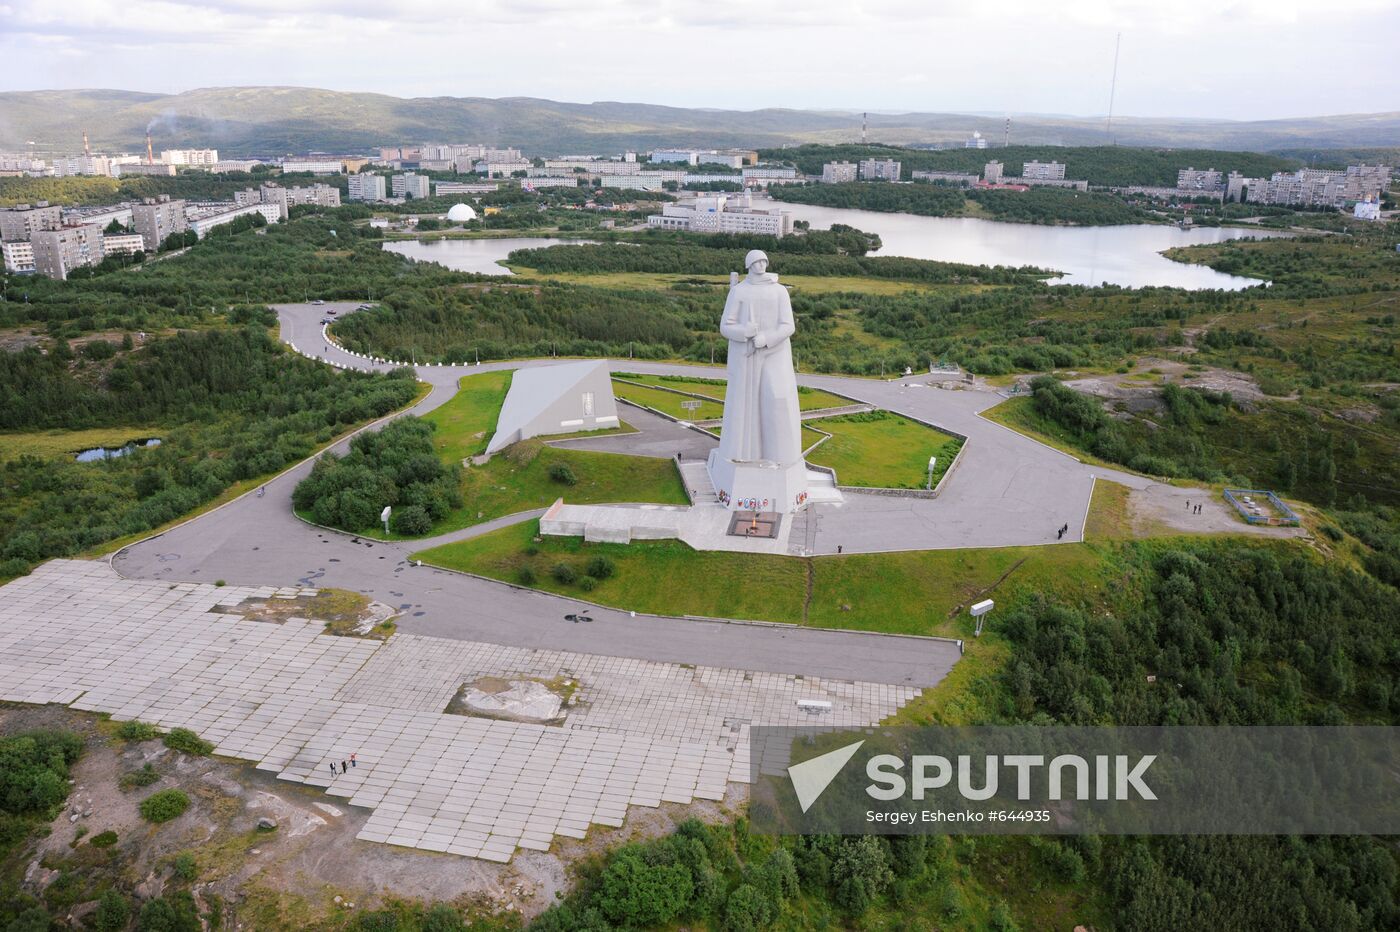 The Monument to Defenders of the Soviet Polar region